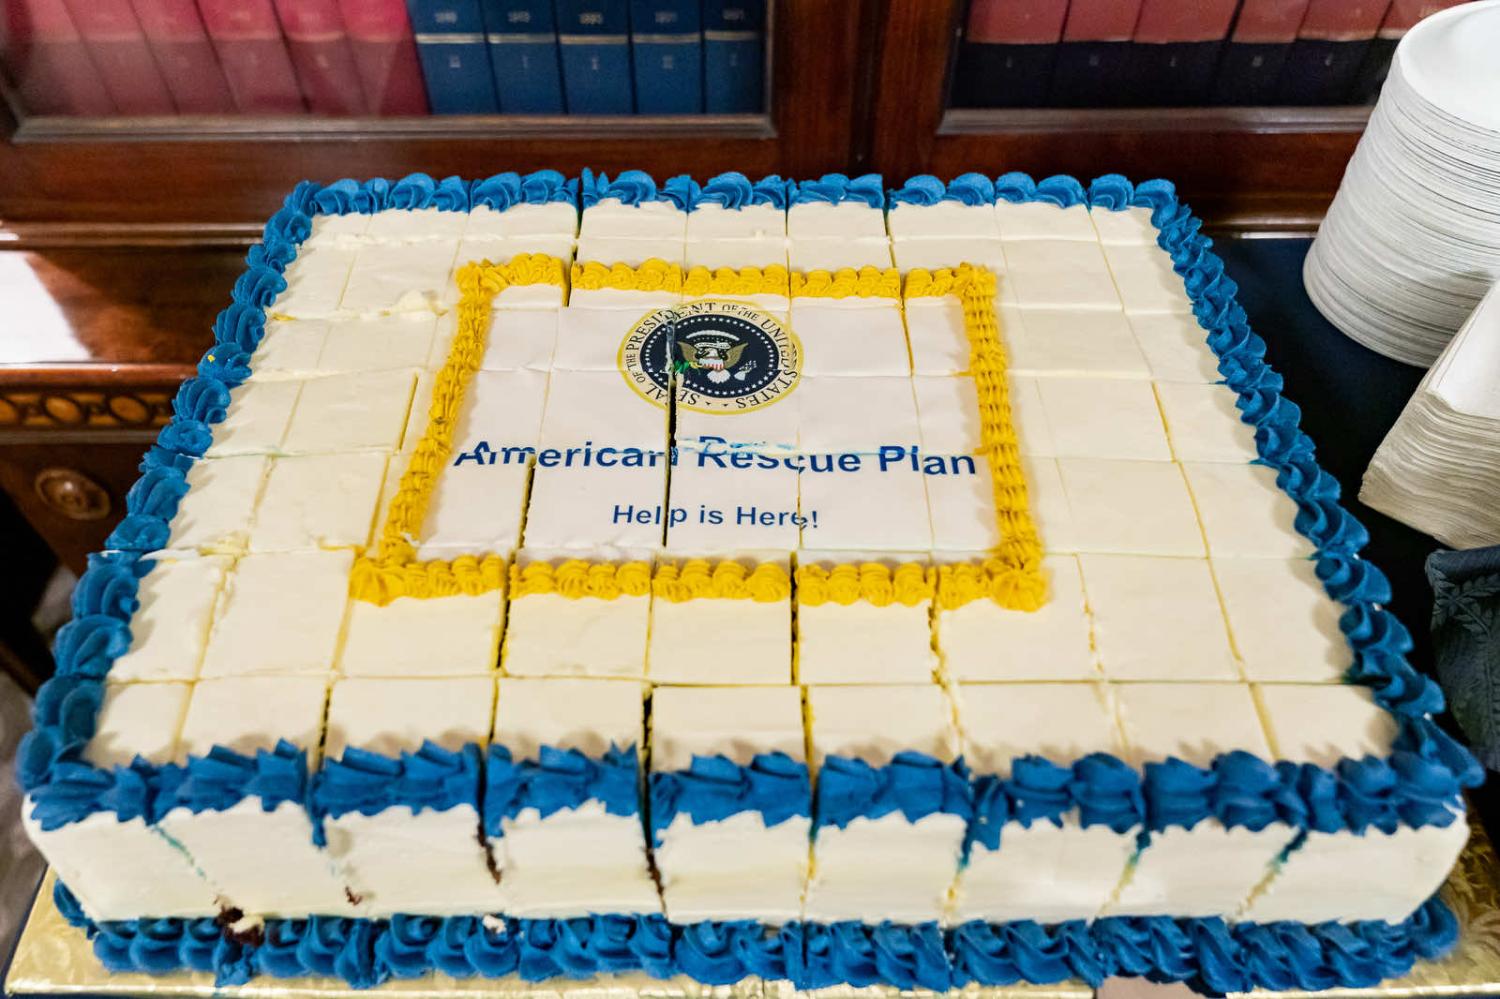 Celebrating the signing of the American Rescue Plan (Carlos Fyfe/White House/Flickr)